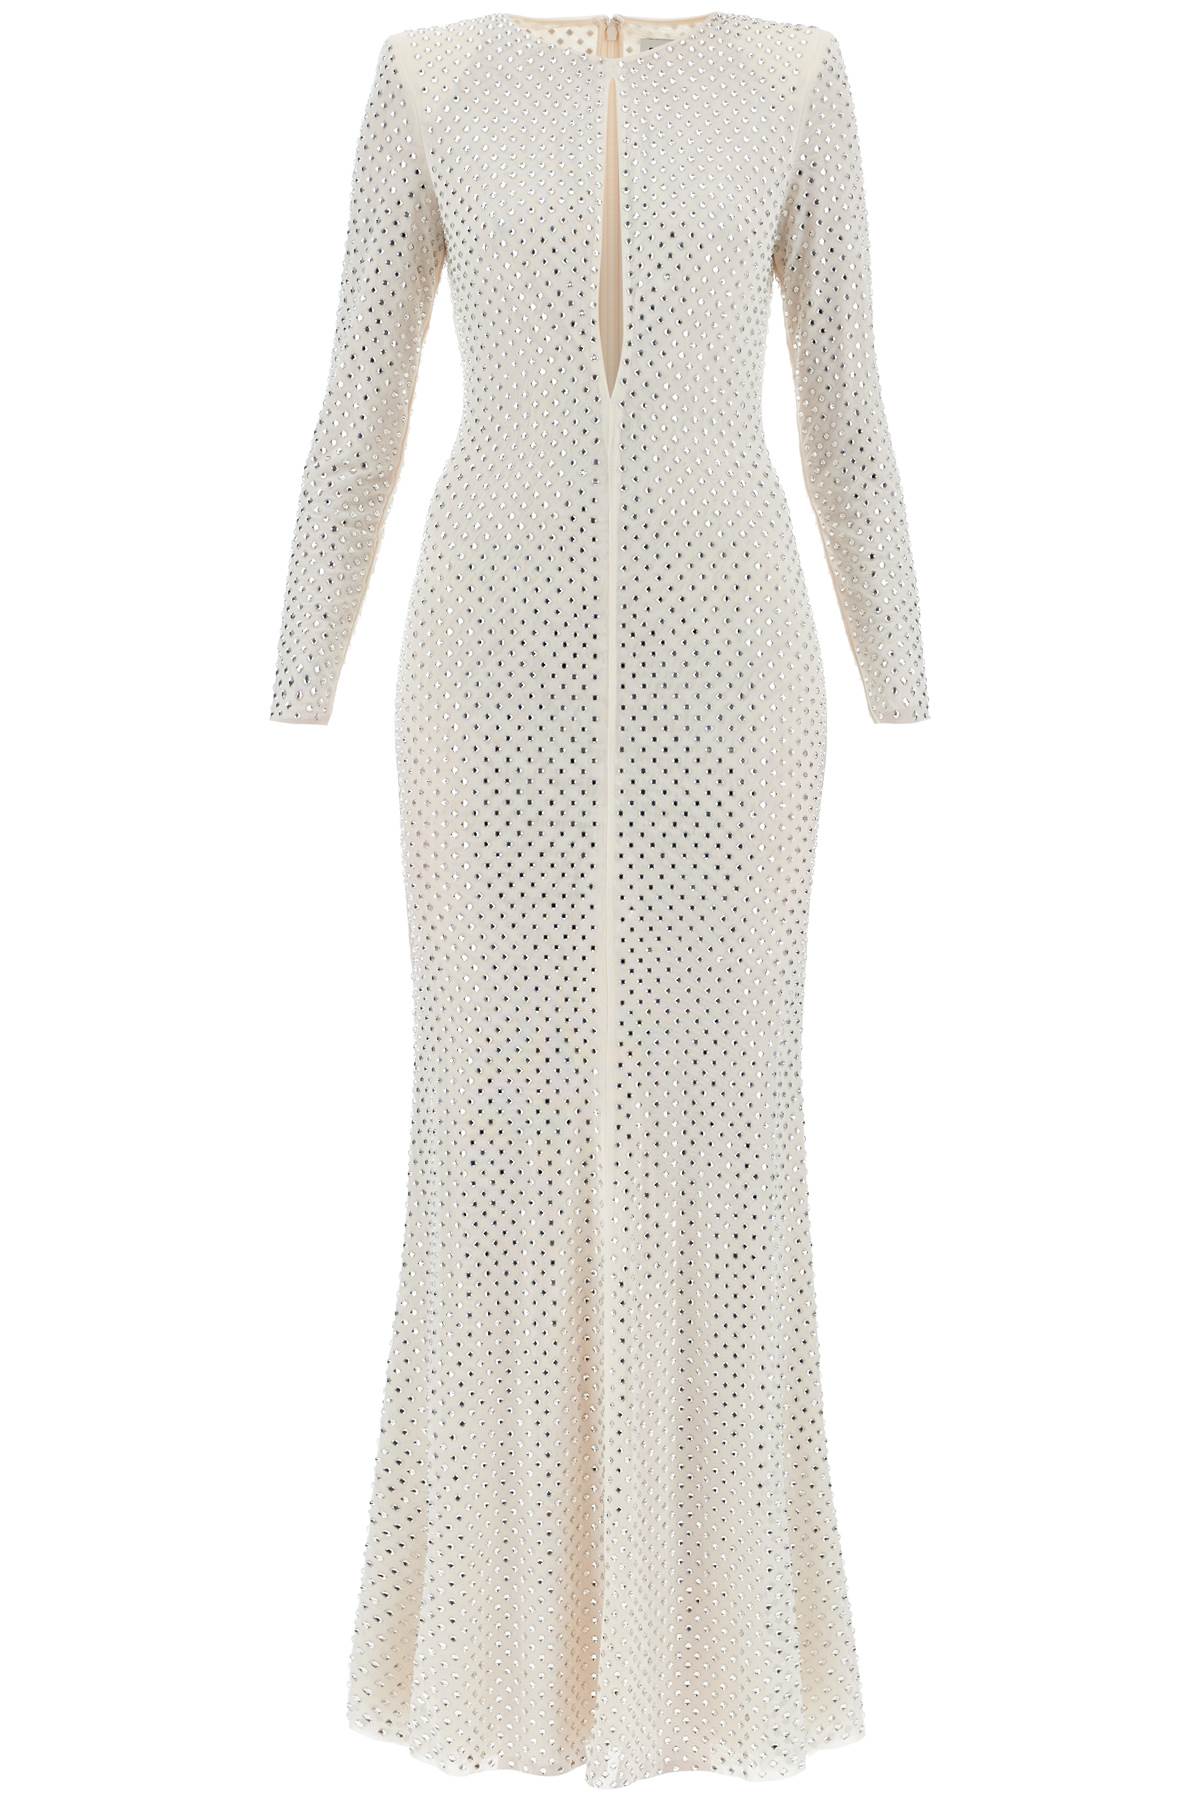  SELF PORTRAIT long mesh dress with crystals